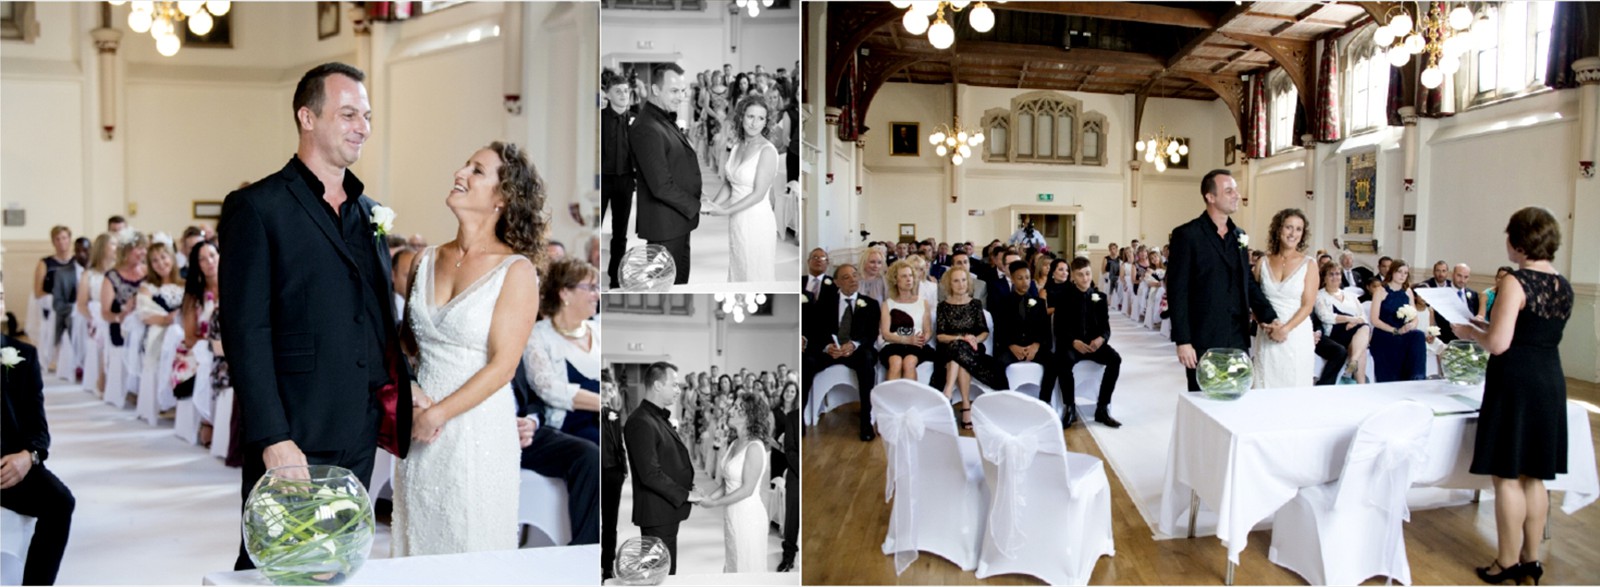 Affordable Wedding Photography Essex Kent An Affordable Essex